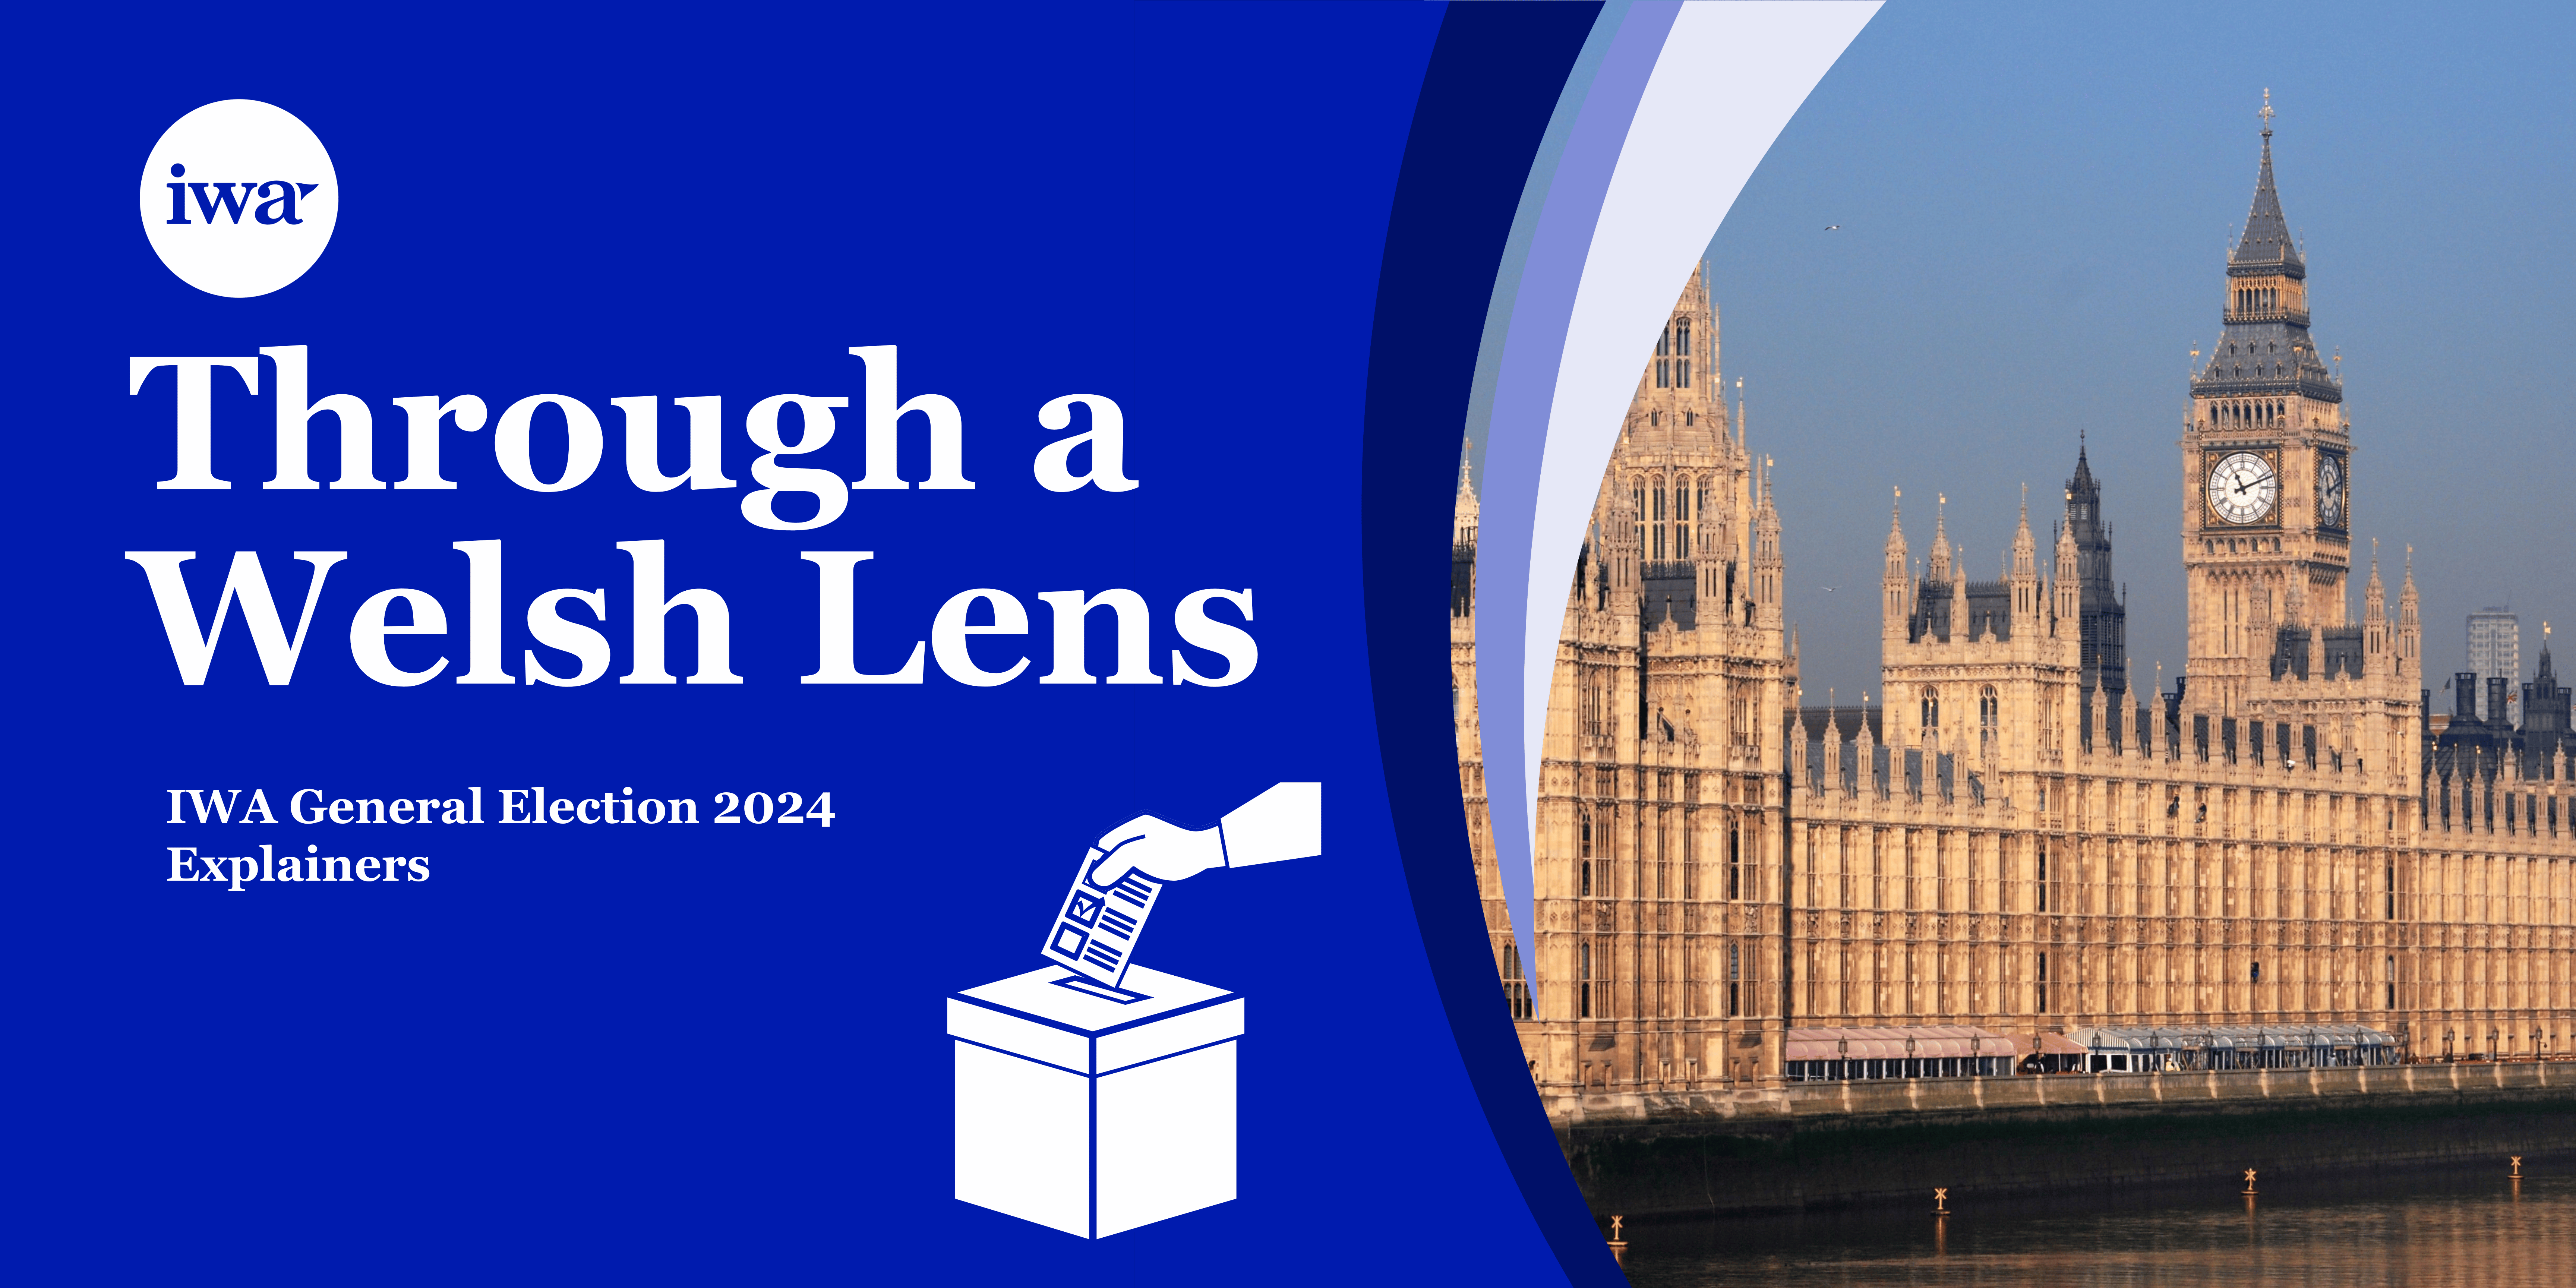 A banner image including the title: Through a Welsh Lens - IWA General Election 2024 Explainers, in white against a blue background. The image is divided in two, with a picture of the Palace of Westminster on the right hand side. There is also a white drawing of a ballot box on the lower right corner of the blue portion of the banner.